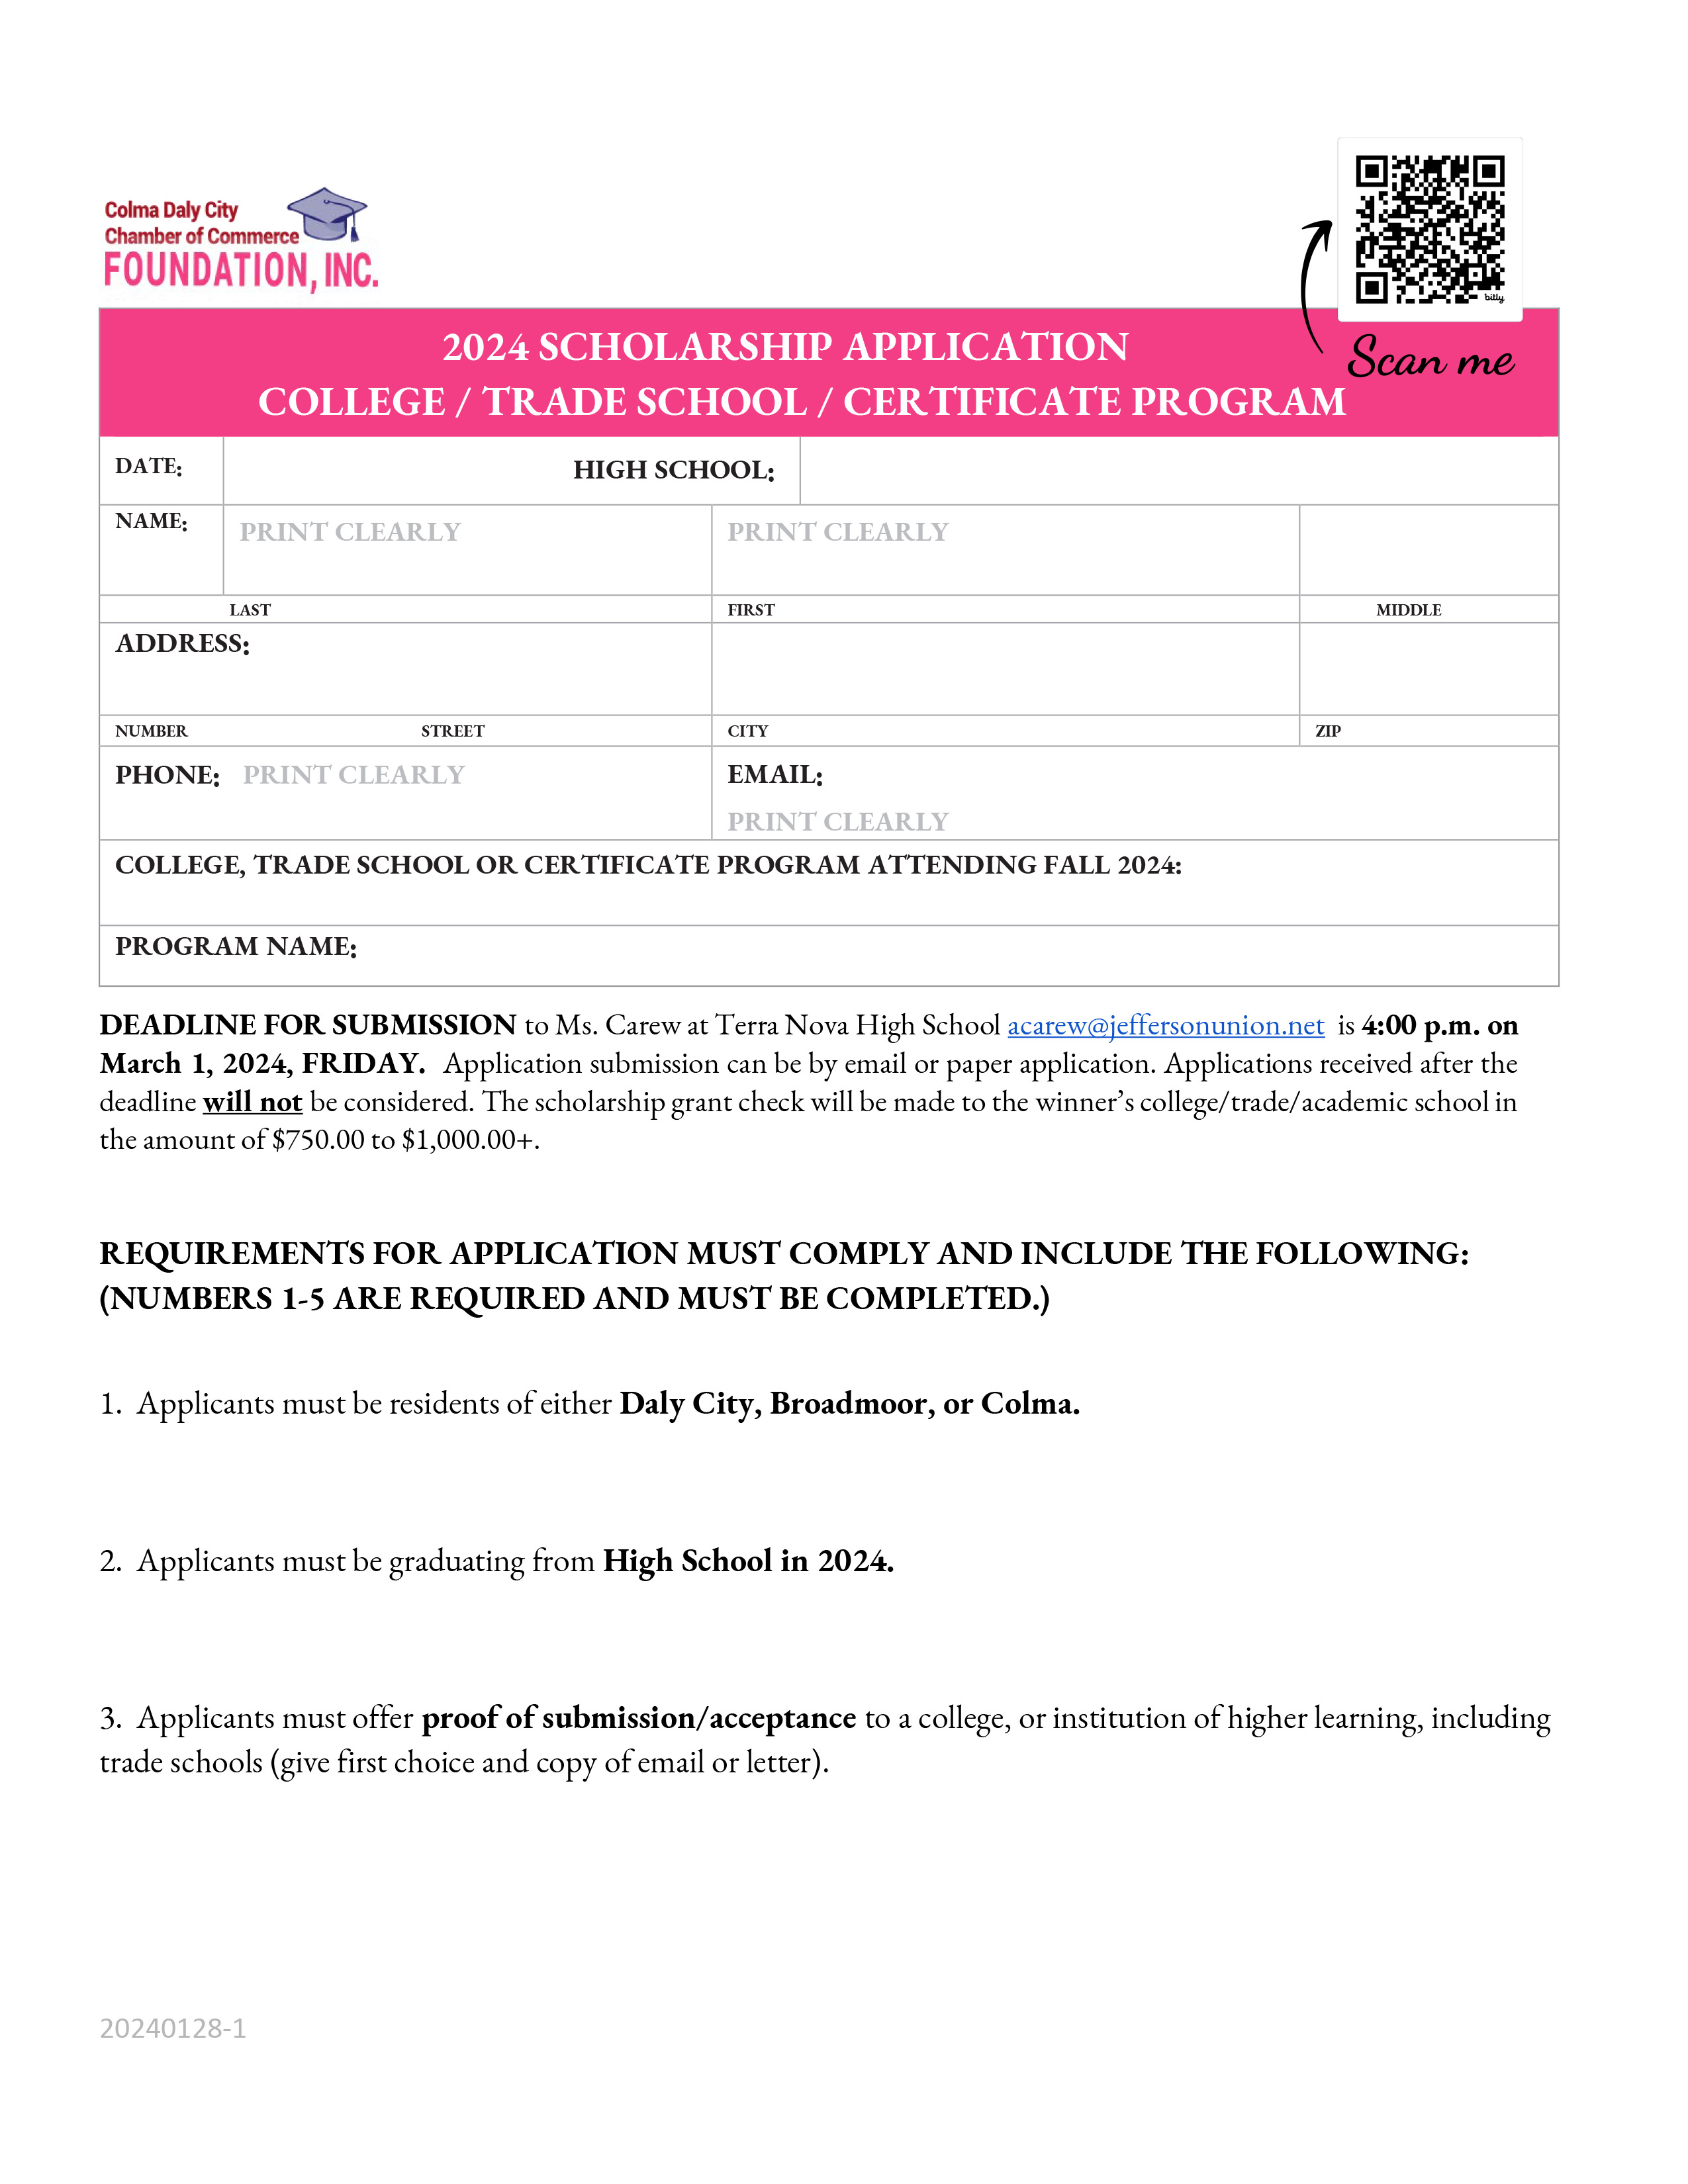 Access to Higher Education Scholarship Application for Broadmoor, Daly City and Colma High School Seniors DUE  MARCH 1,2024